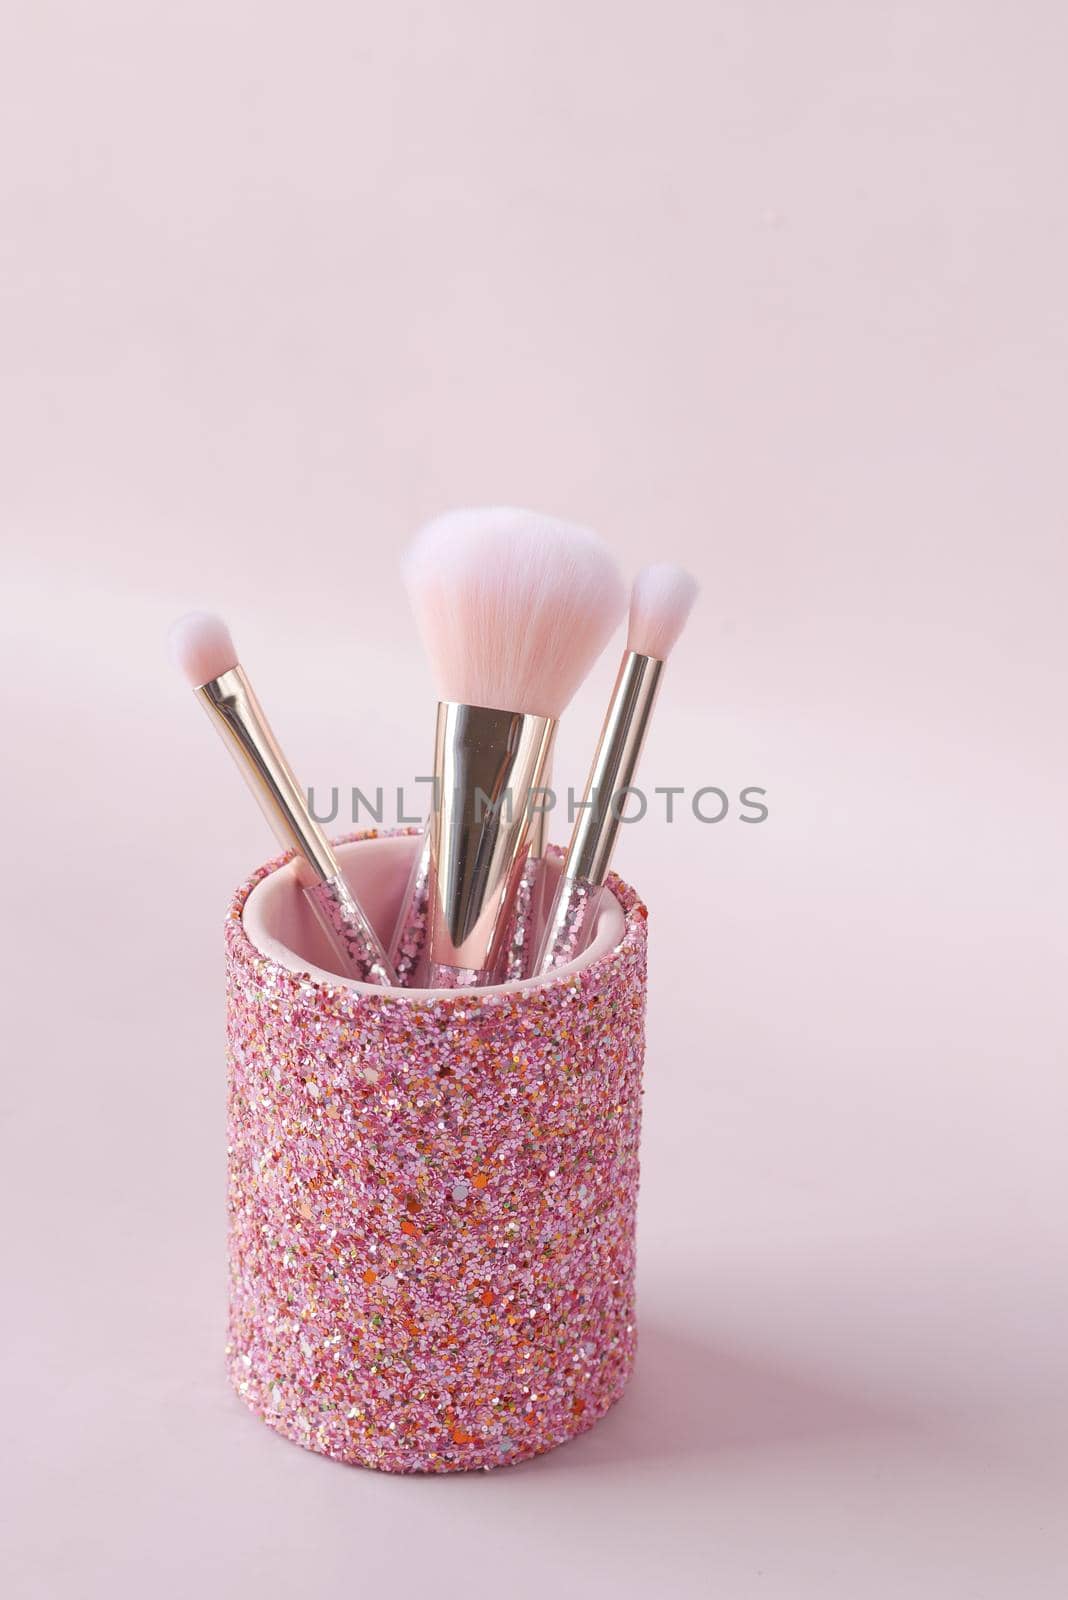 beauty brush in a box on light purple background .